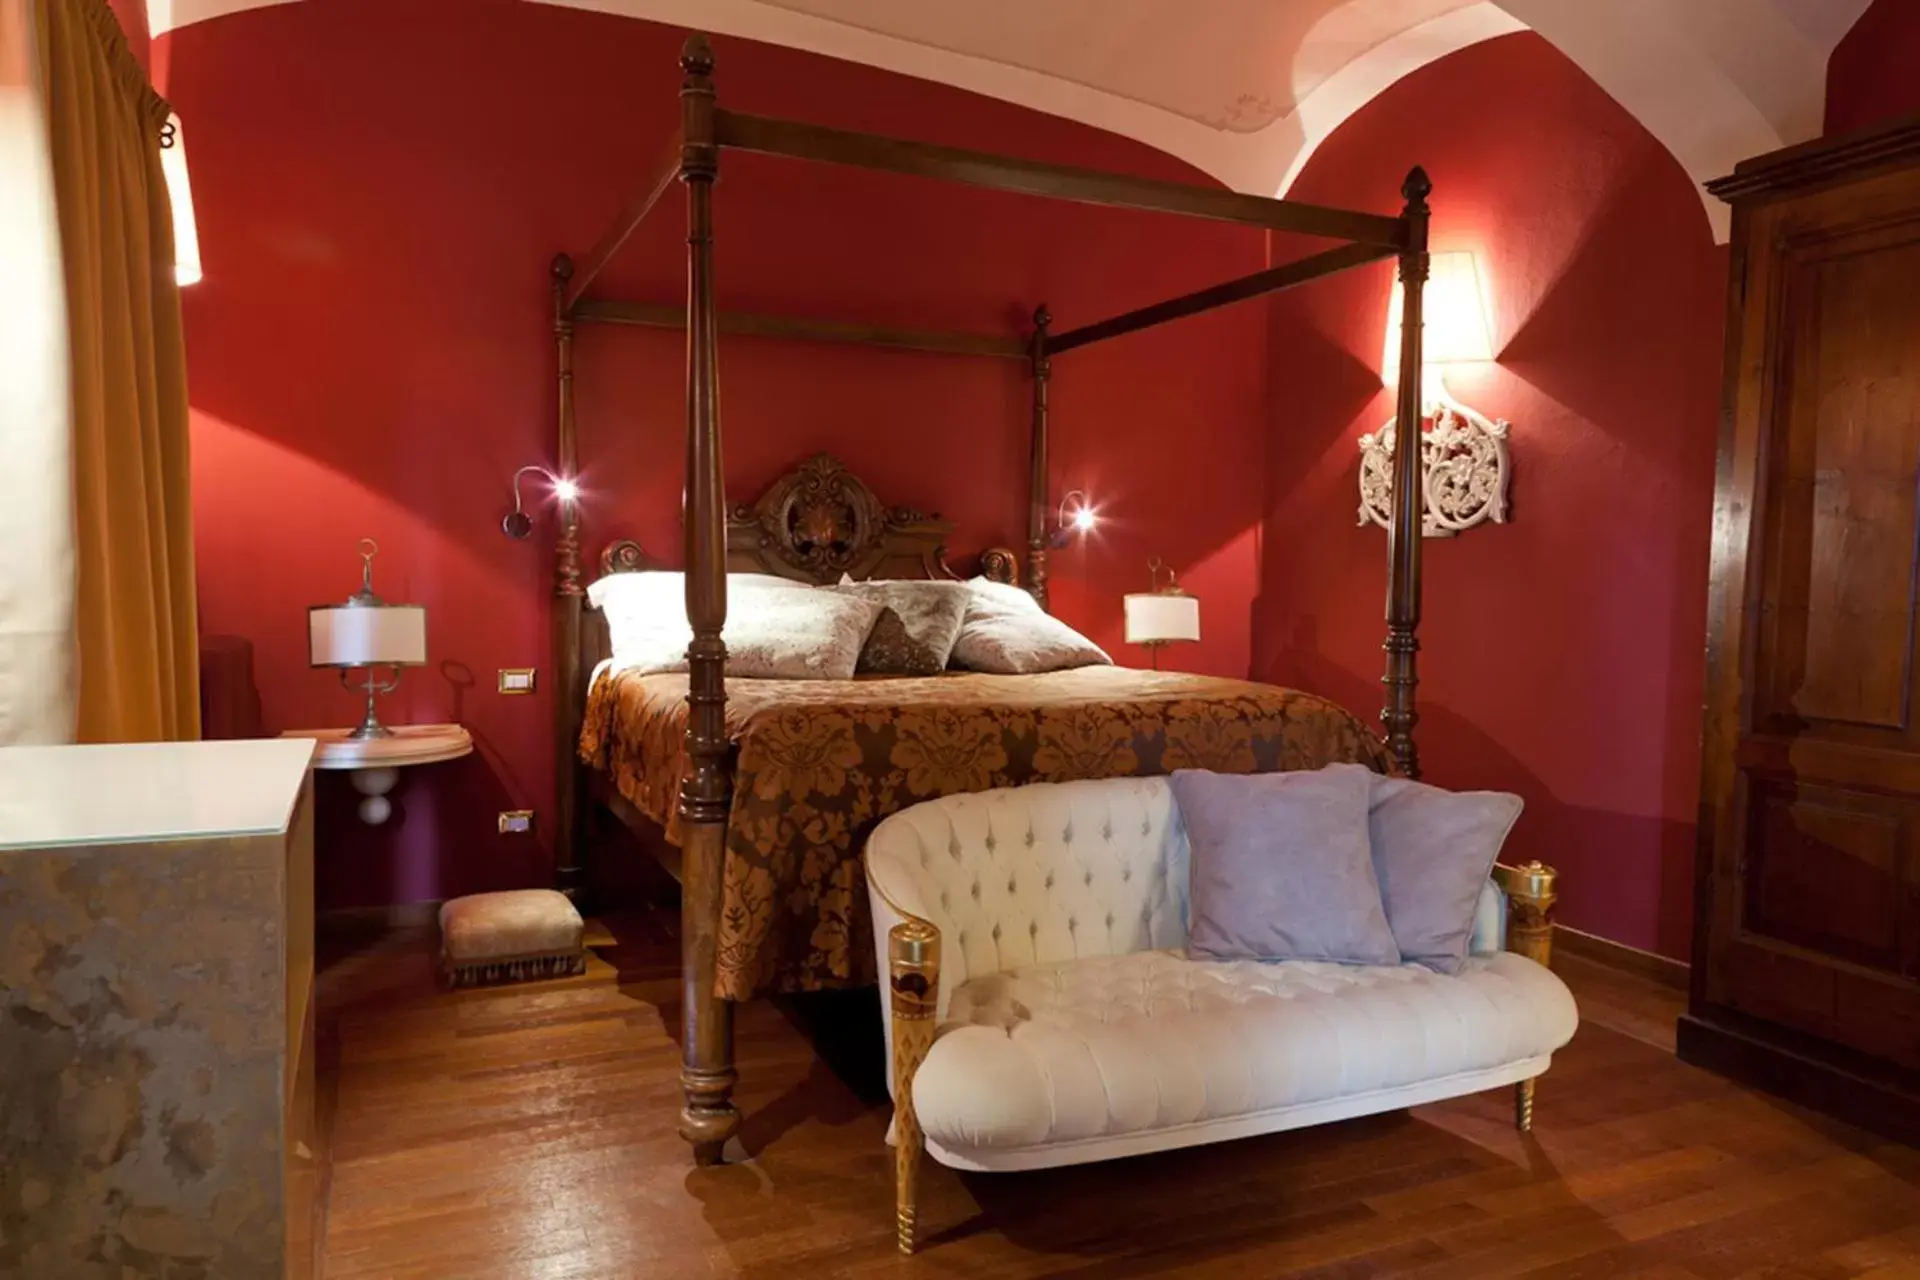 Bed, Room Photo in Relais Montemaggiore